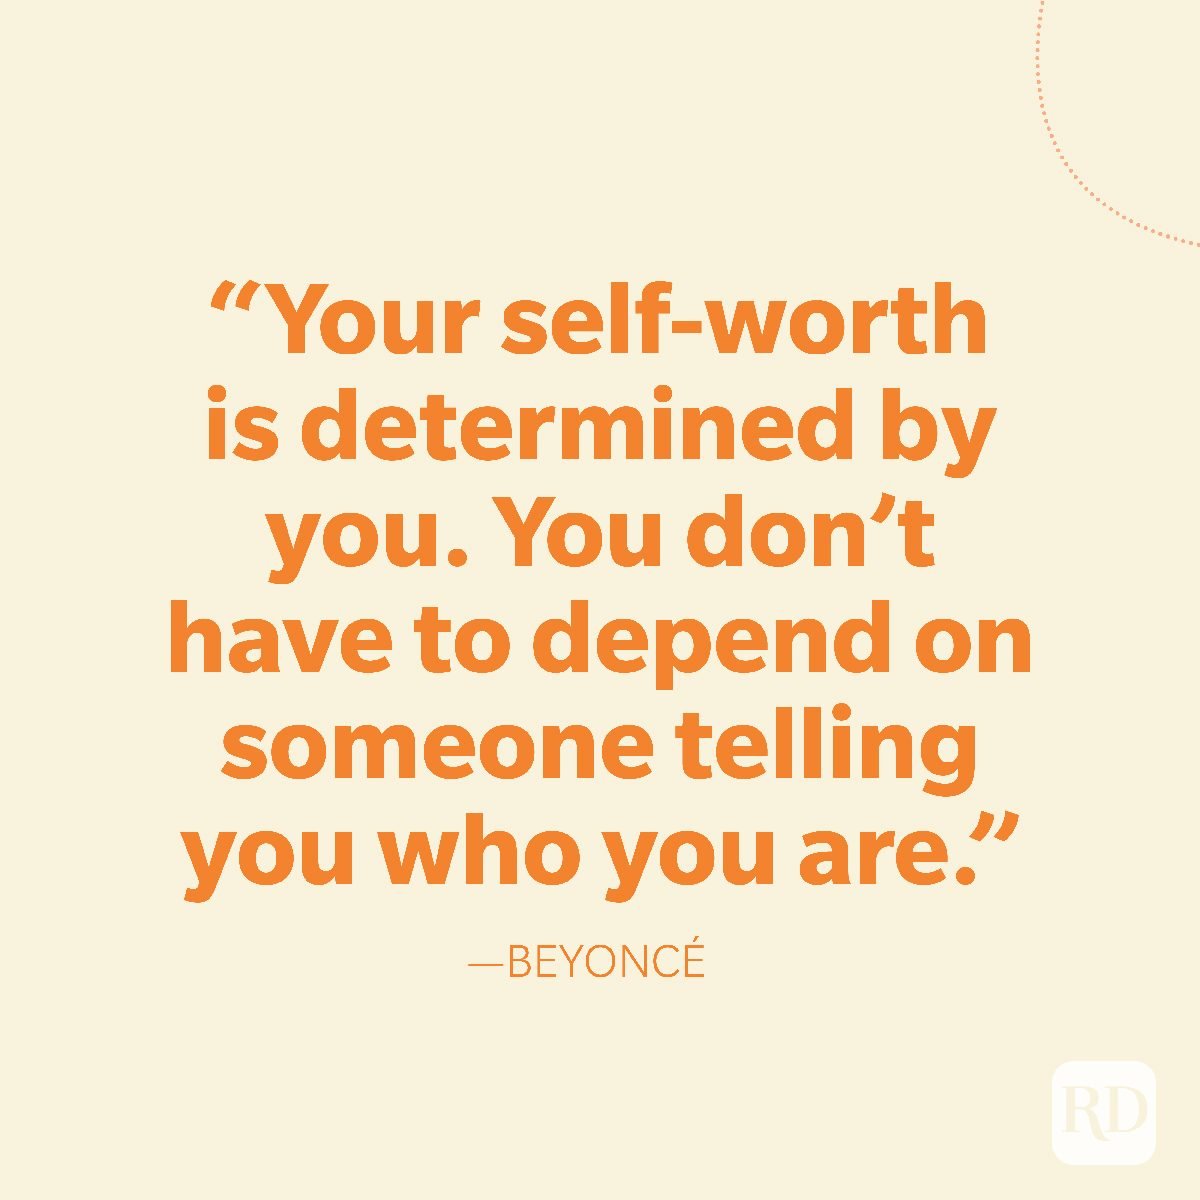 33-Your self-worth is determined by you. You don't have to depend on someone telling you who you are